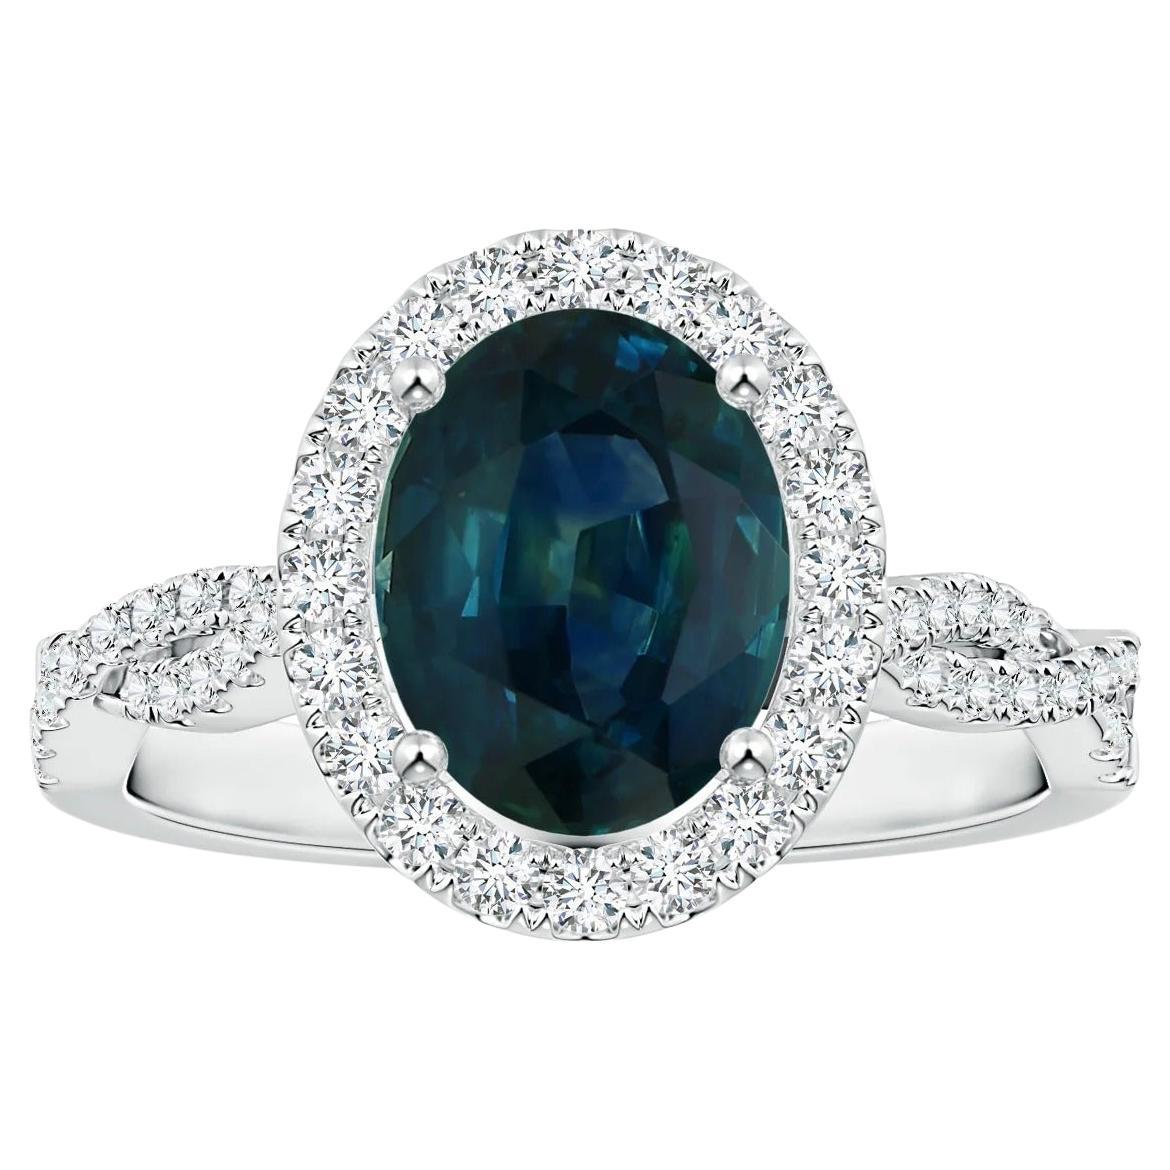 For Sale:  Angara Gia Certified Natural Teal Sapphire Diamond Shank Ring in Platinum